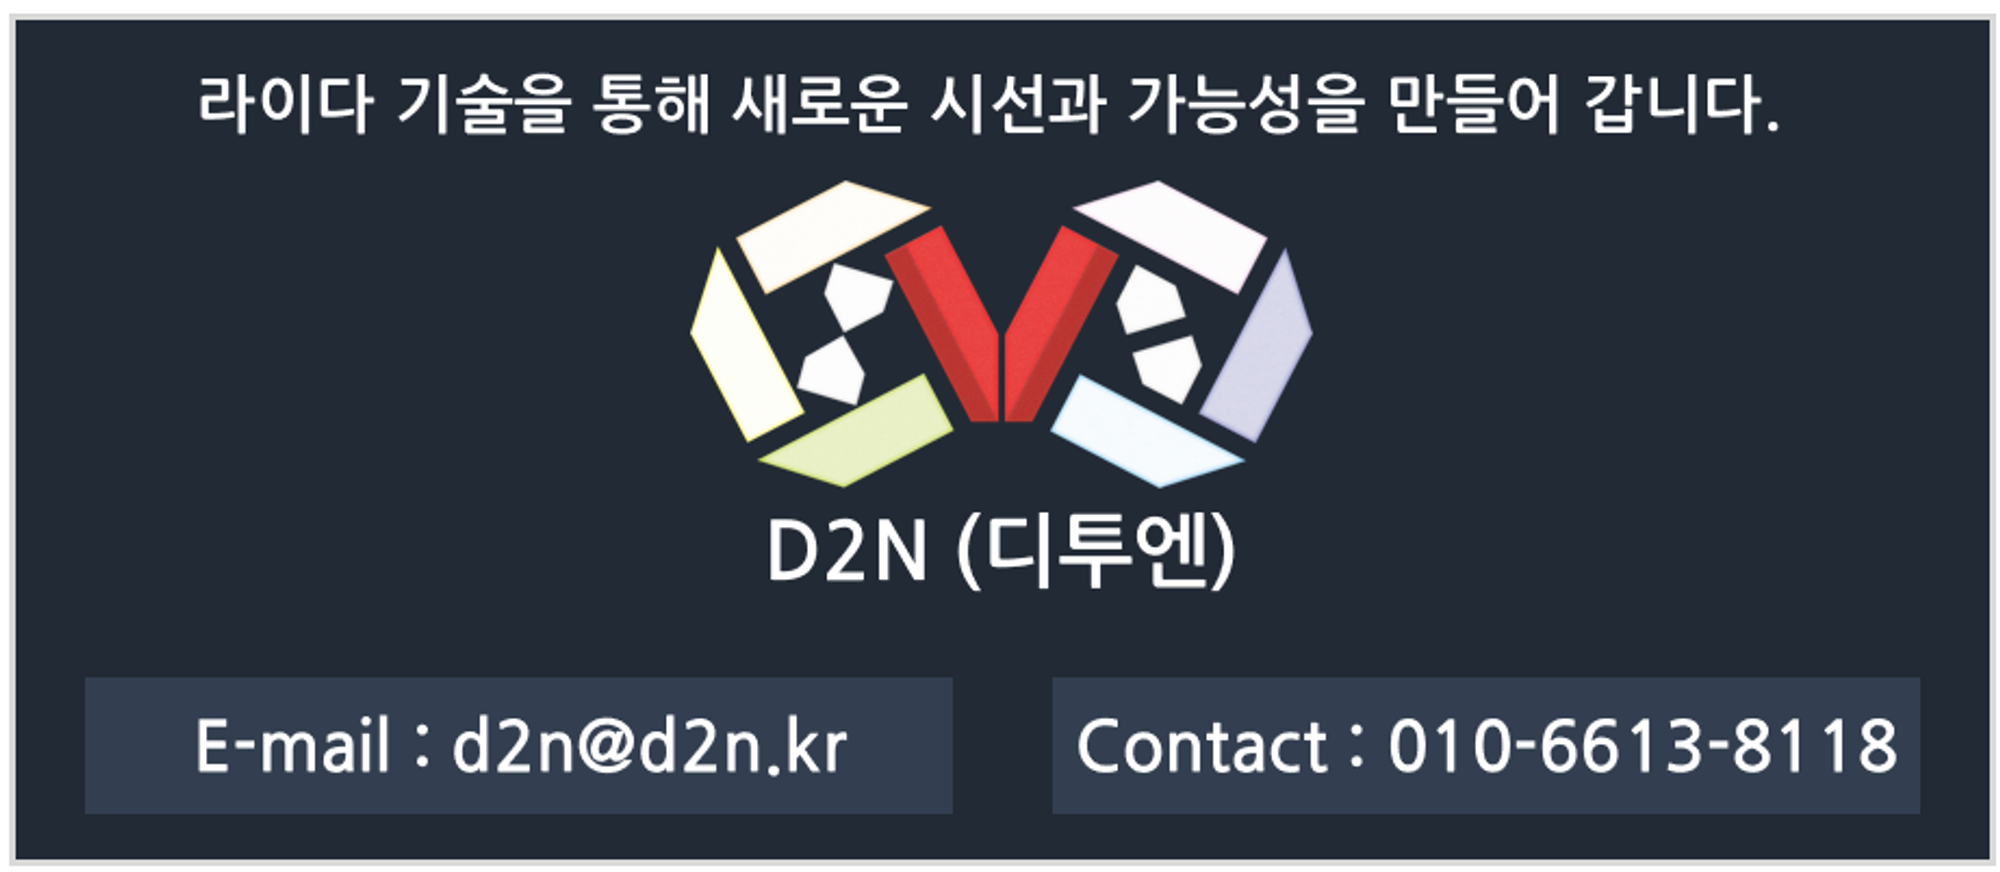 Thank you!  Have a wonderful day!  Contact : d2n@d2n.kr